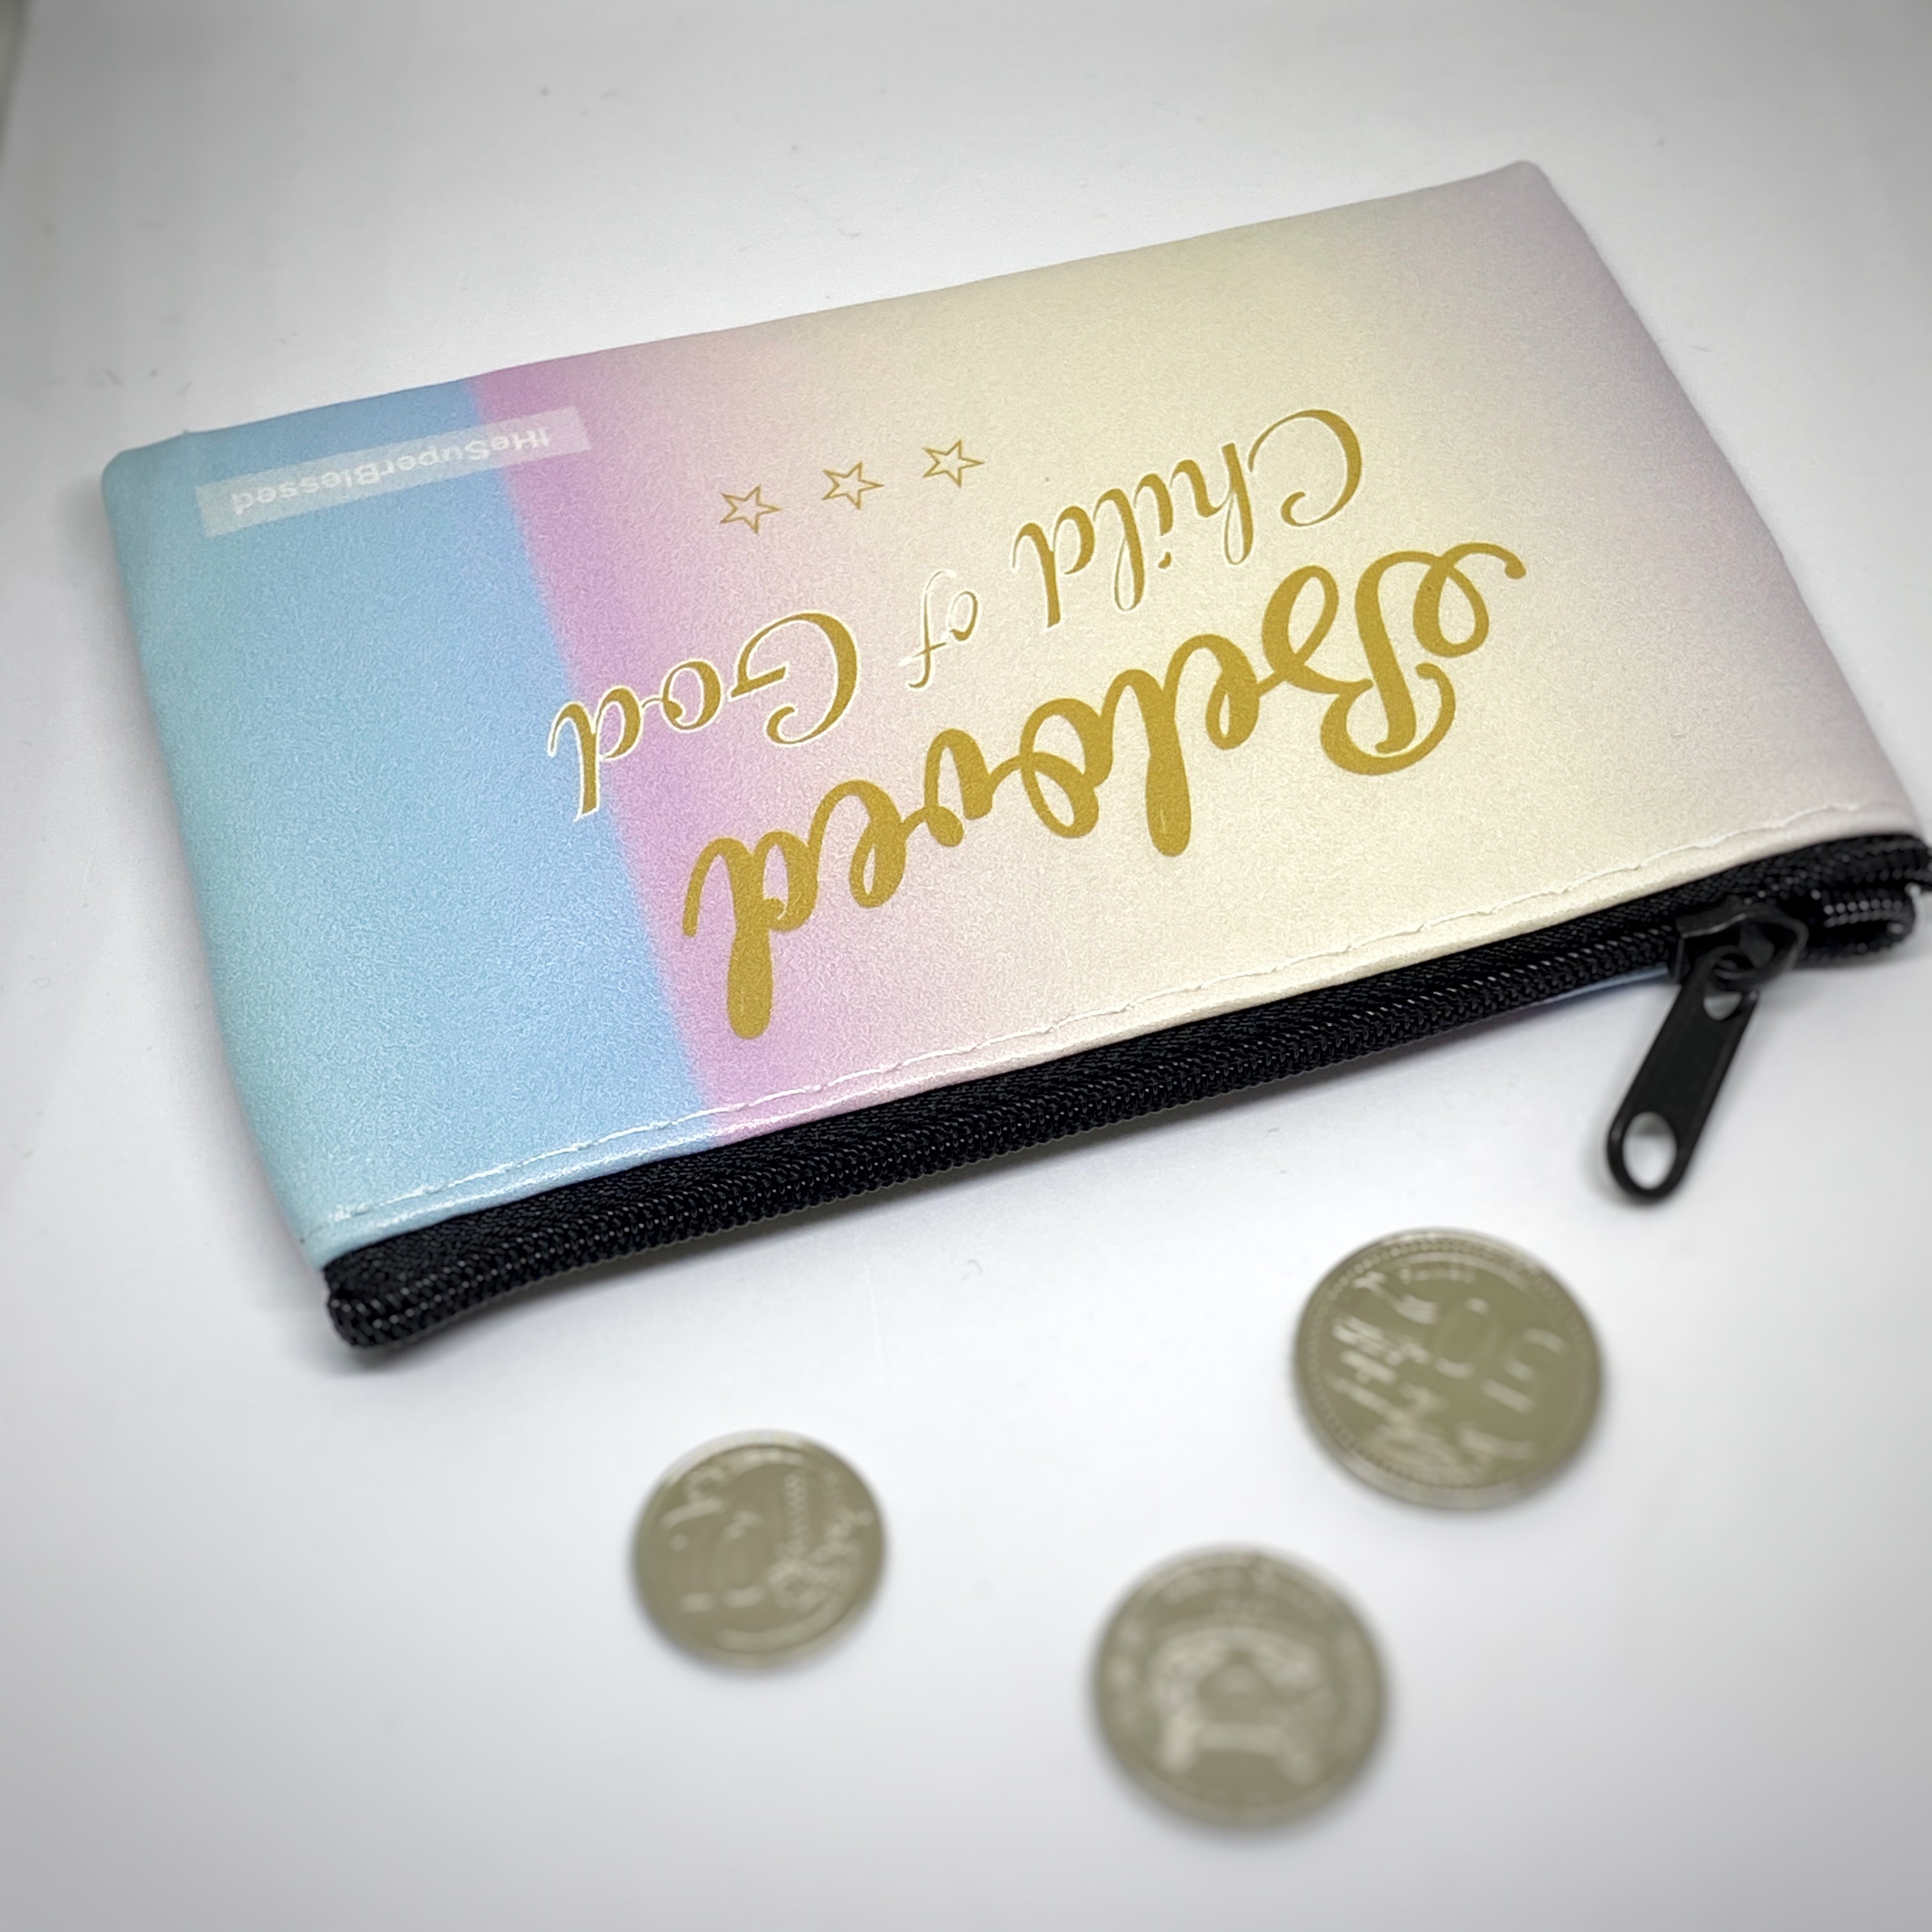 ROCKONLINE | New Creation Church | Joseph Prince | Scriptures | Gifts | Coin Pouch | Scriptures | PU Coin Pouch 13x9cm, The Super Blessed | Christian Gifts | Small Gifts | Women | Youth | The Super Blessed | Rock Bookshop | Rock Bookstore | Star Vista | Free Delivery for Singapore Orders above $50.